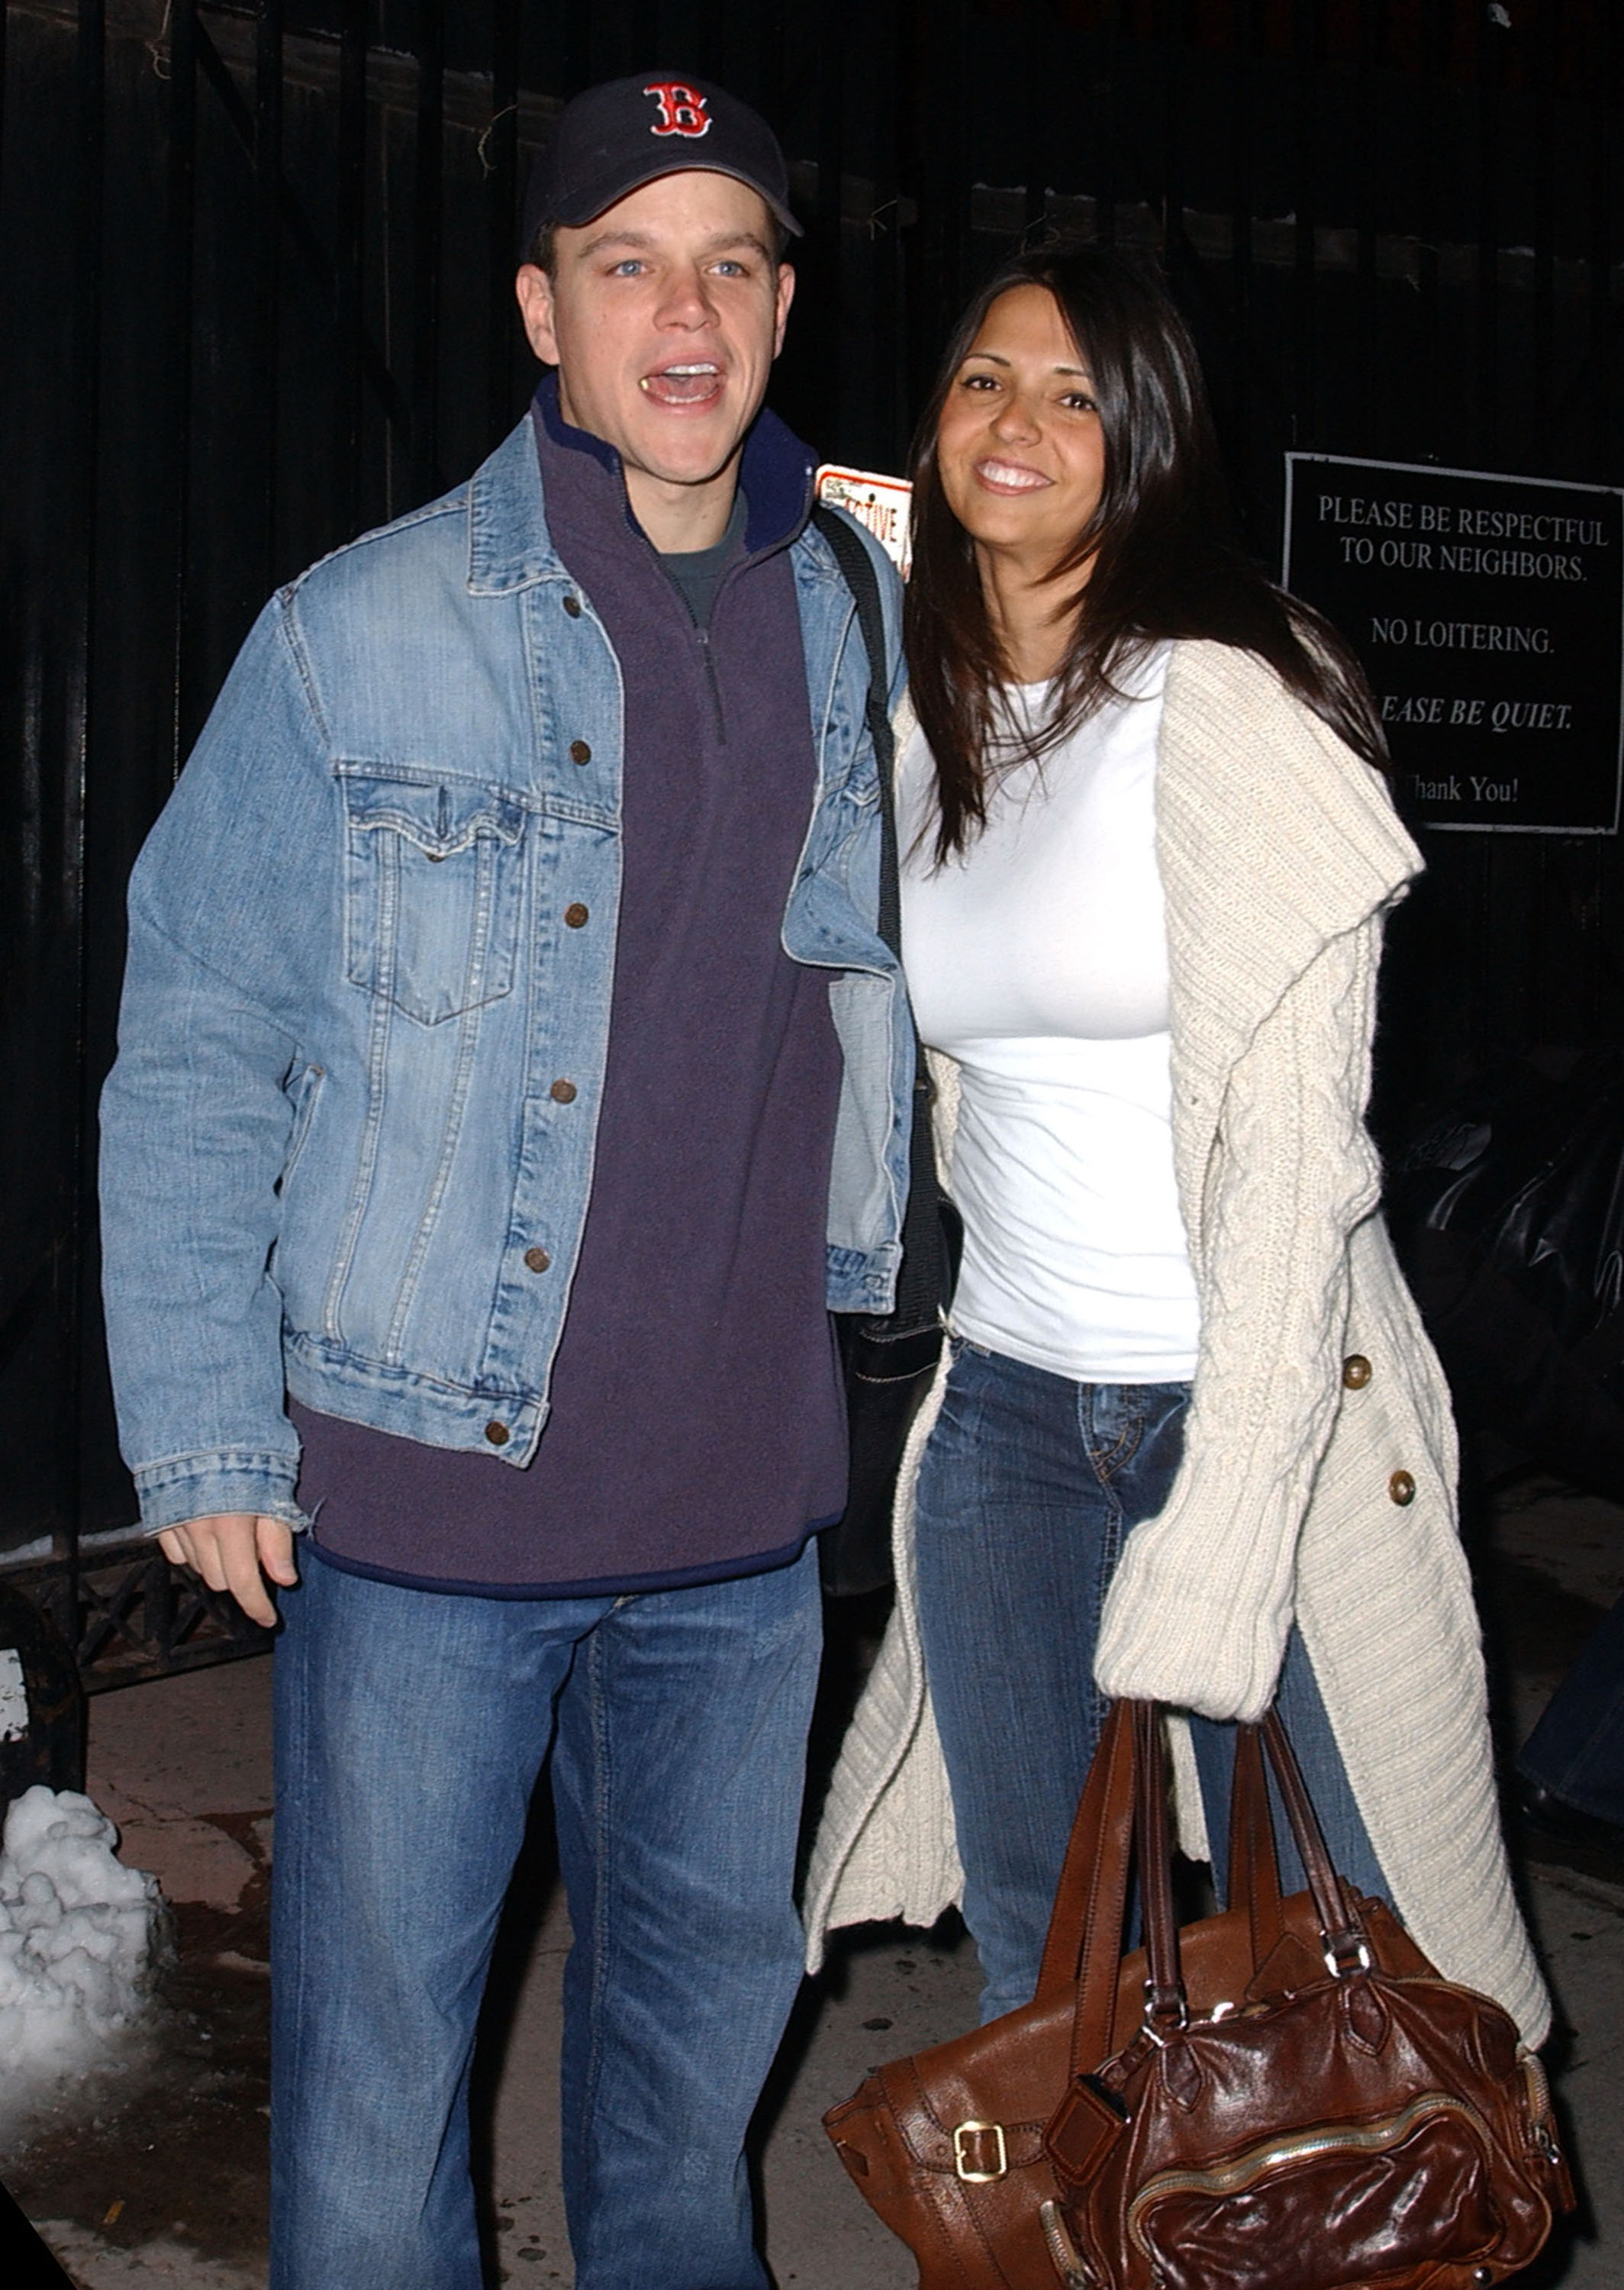 Matt Damon and Luciana Bozan leave a midtown apartment on December 10, 2005 in New York City | Source: Getty Images